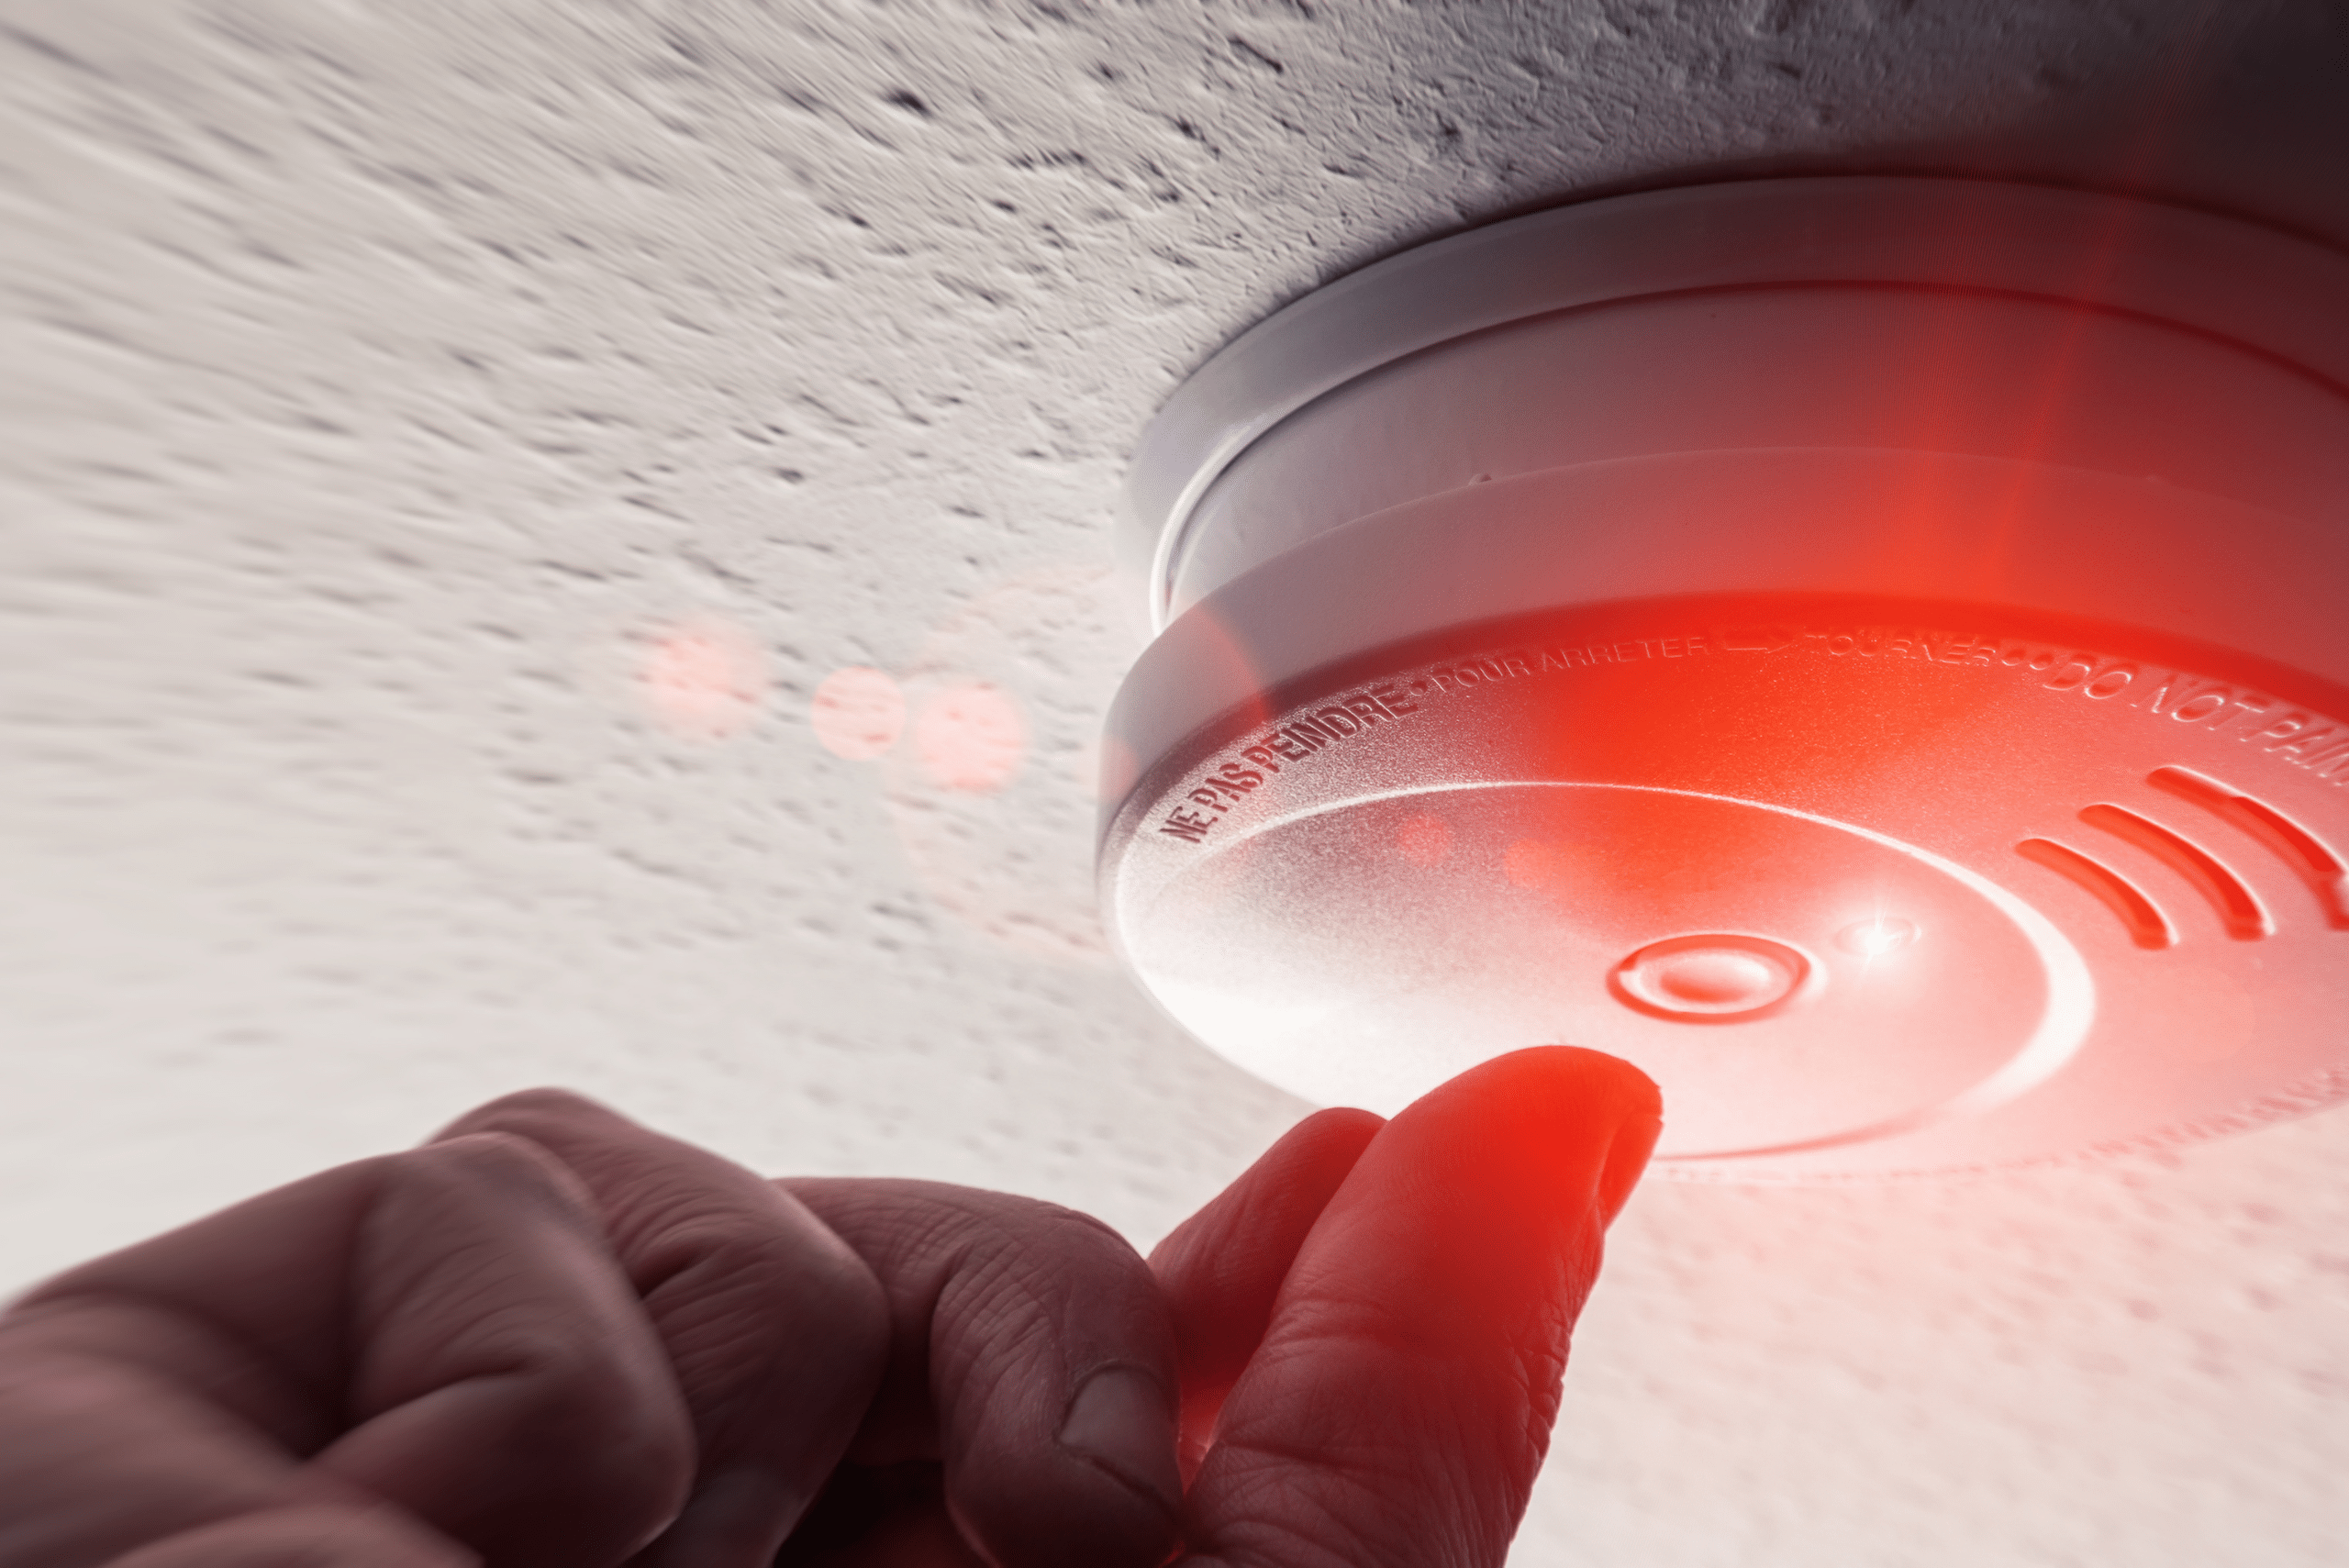 Hand pressing the button on a smoke alarm.